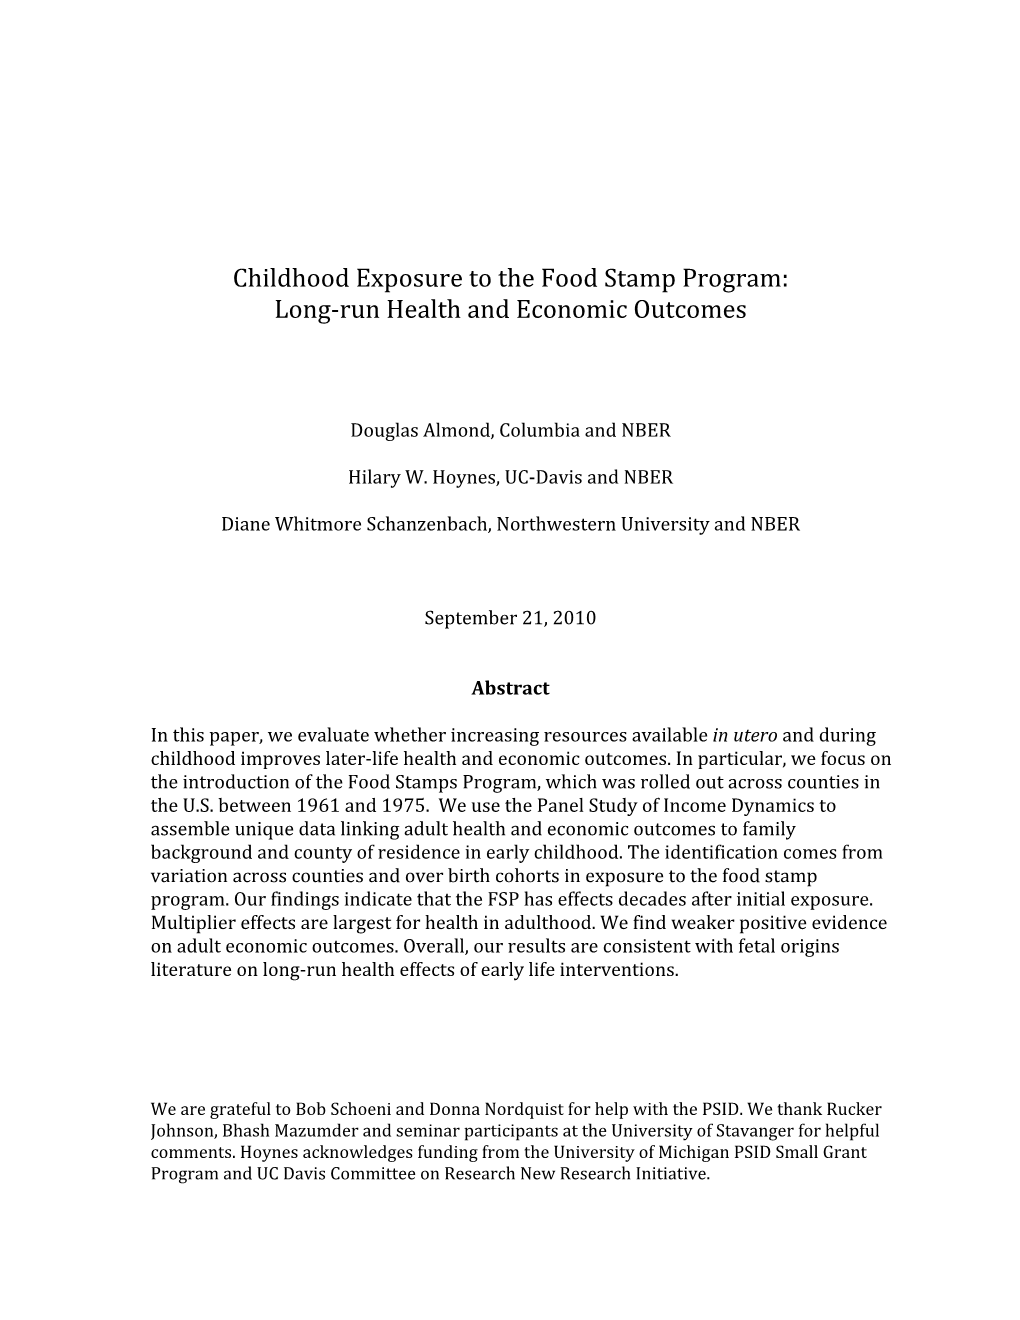 Childhood Exposure to the Food Stamp Program: Long‐Run Health and Economic Outcomes